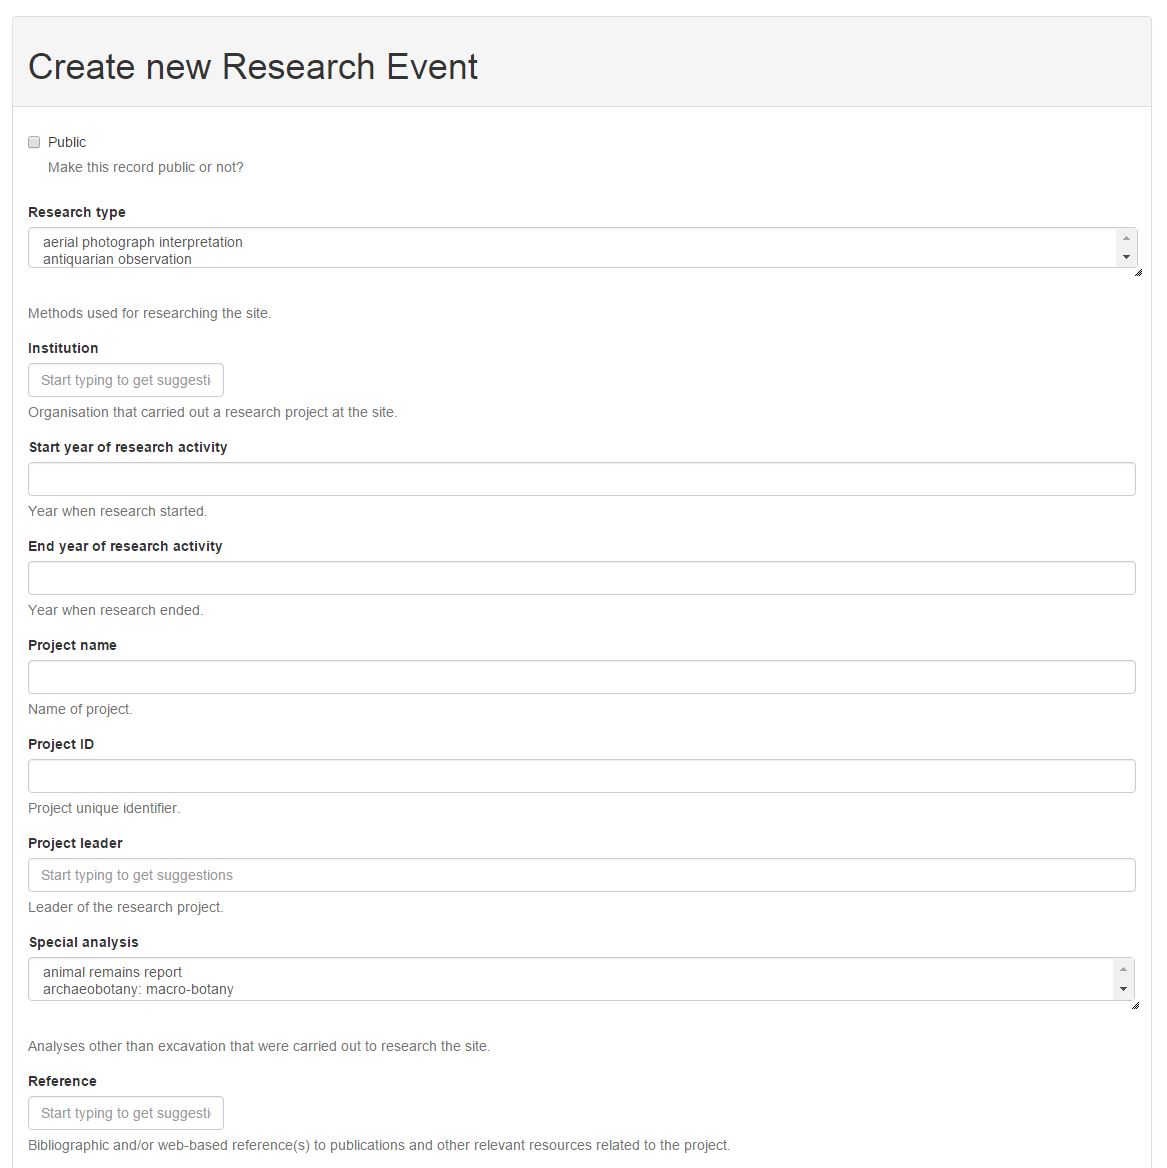 Figure 3. Create new Research Event page